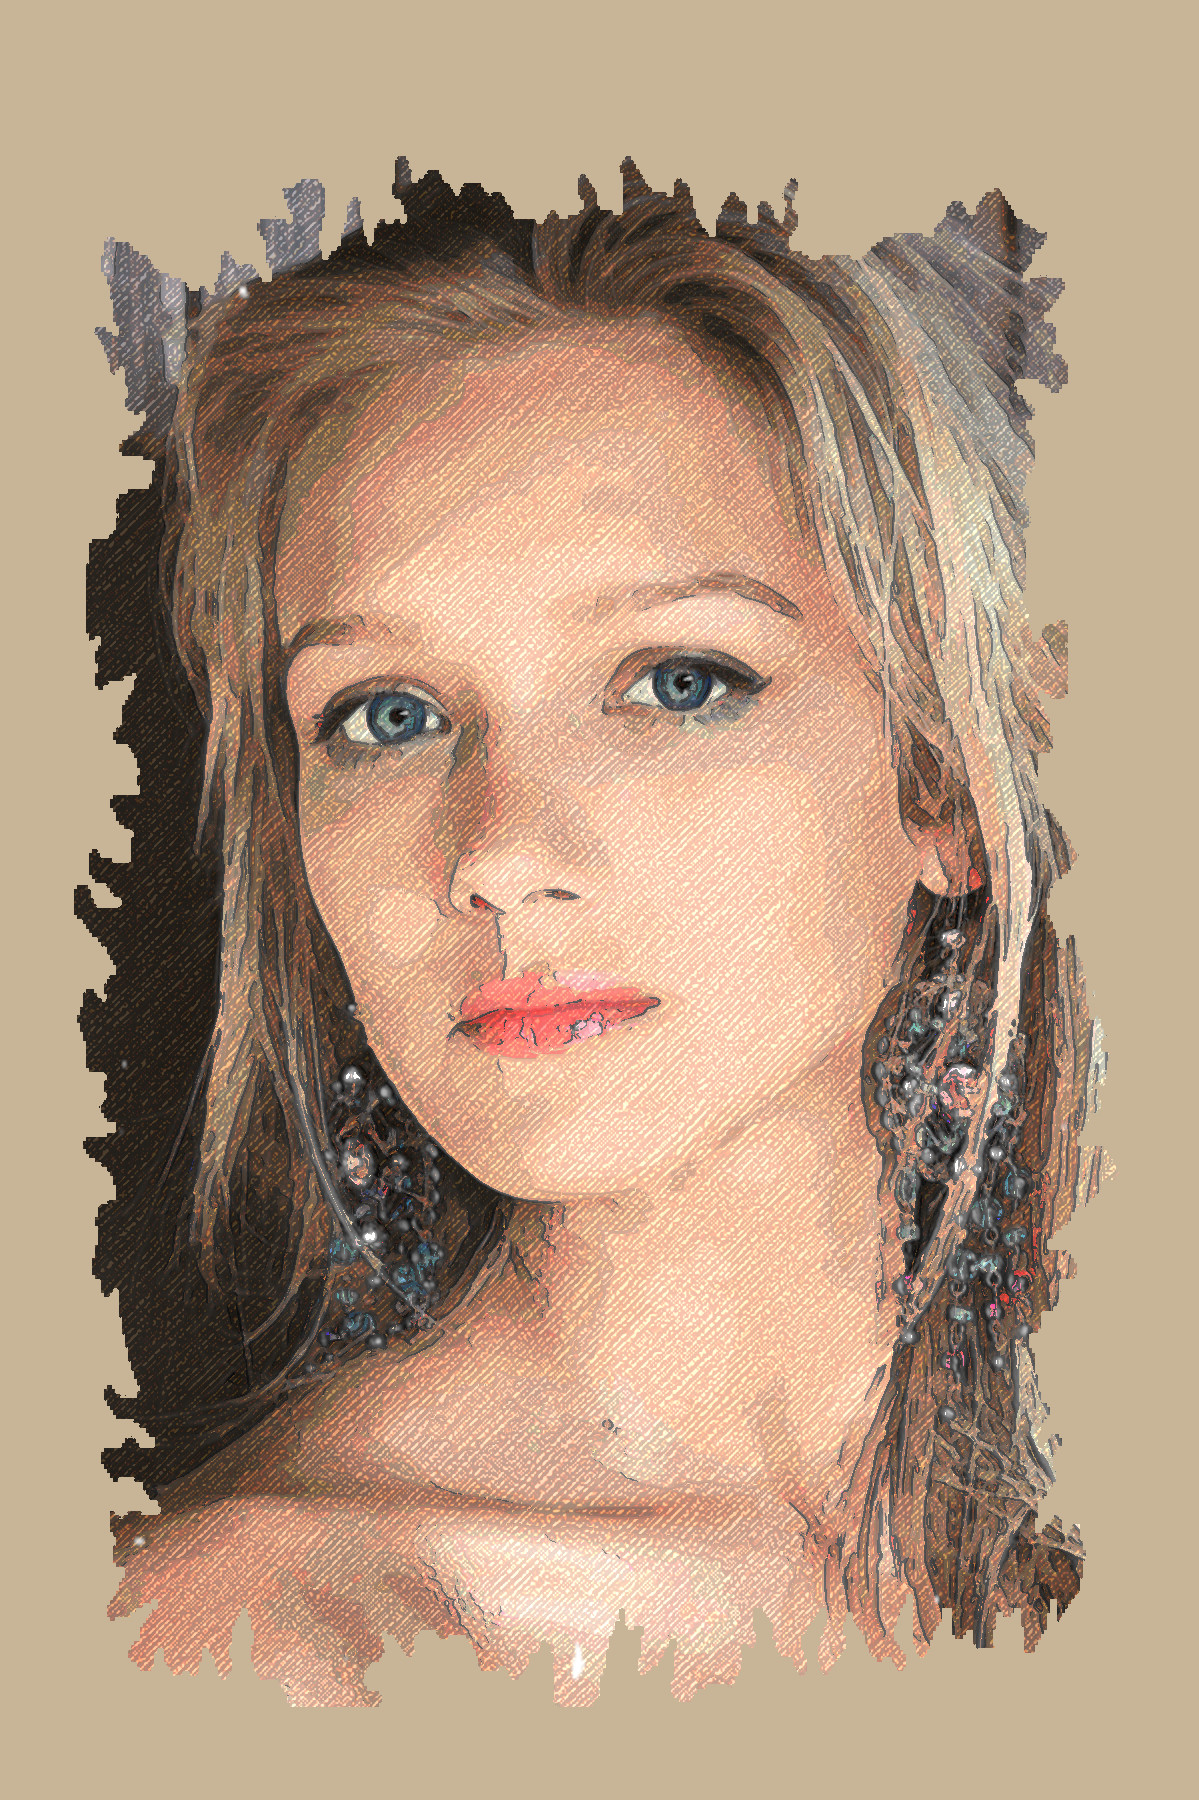 2022-01-11 14-40-38girl-2306829_1280 as a drawing with texture coloree (BC2X) (lines look regular) (lines look 2 mono) (texture colour used [165,125,94]) (nr of areas 255).jpeg